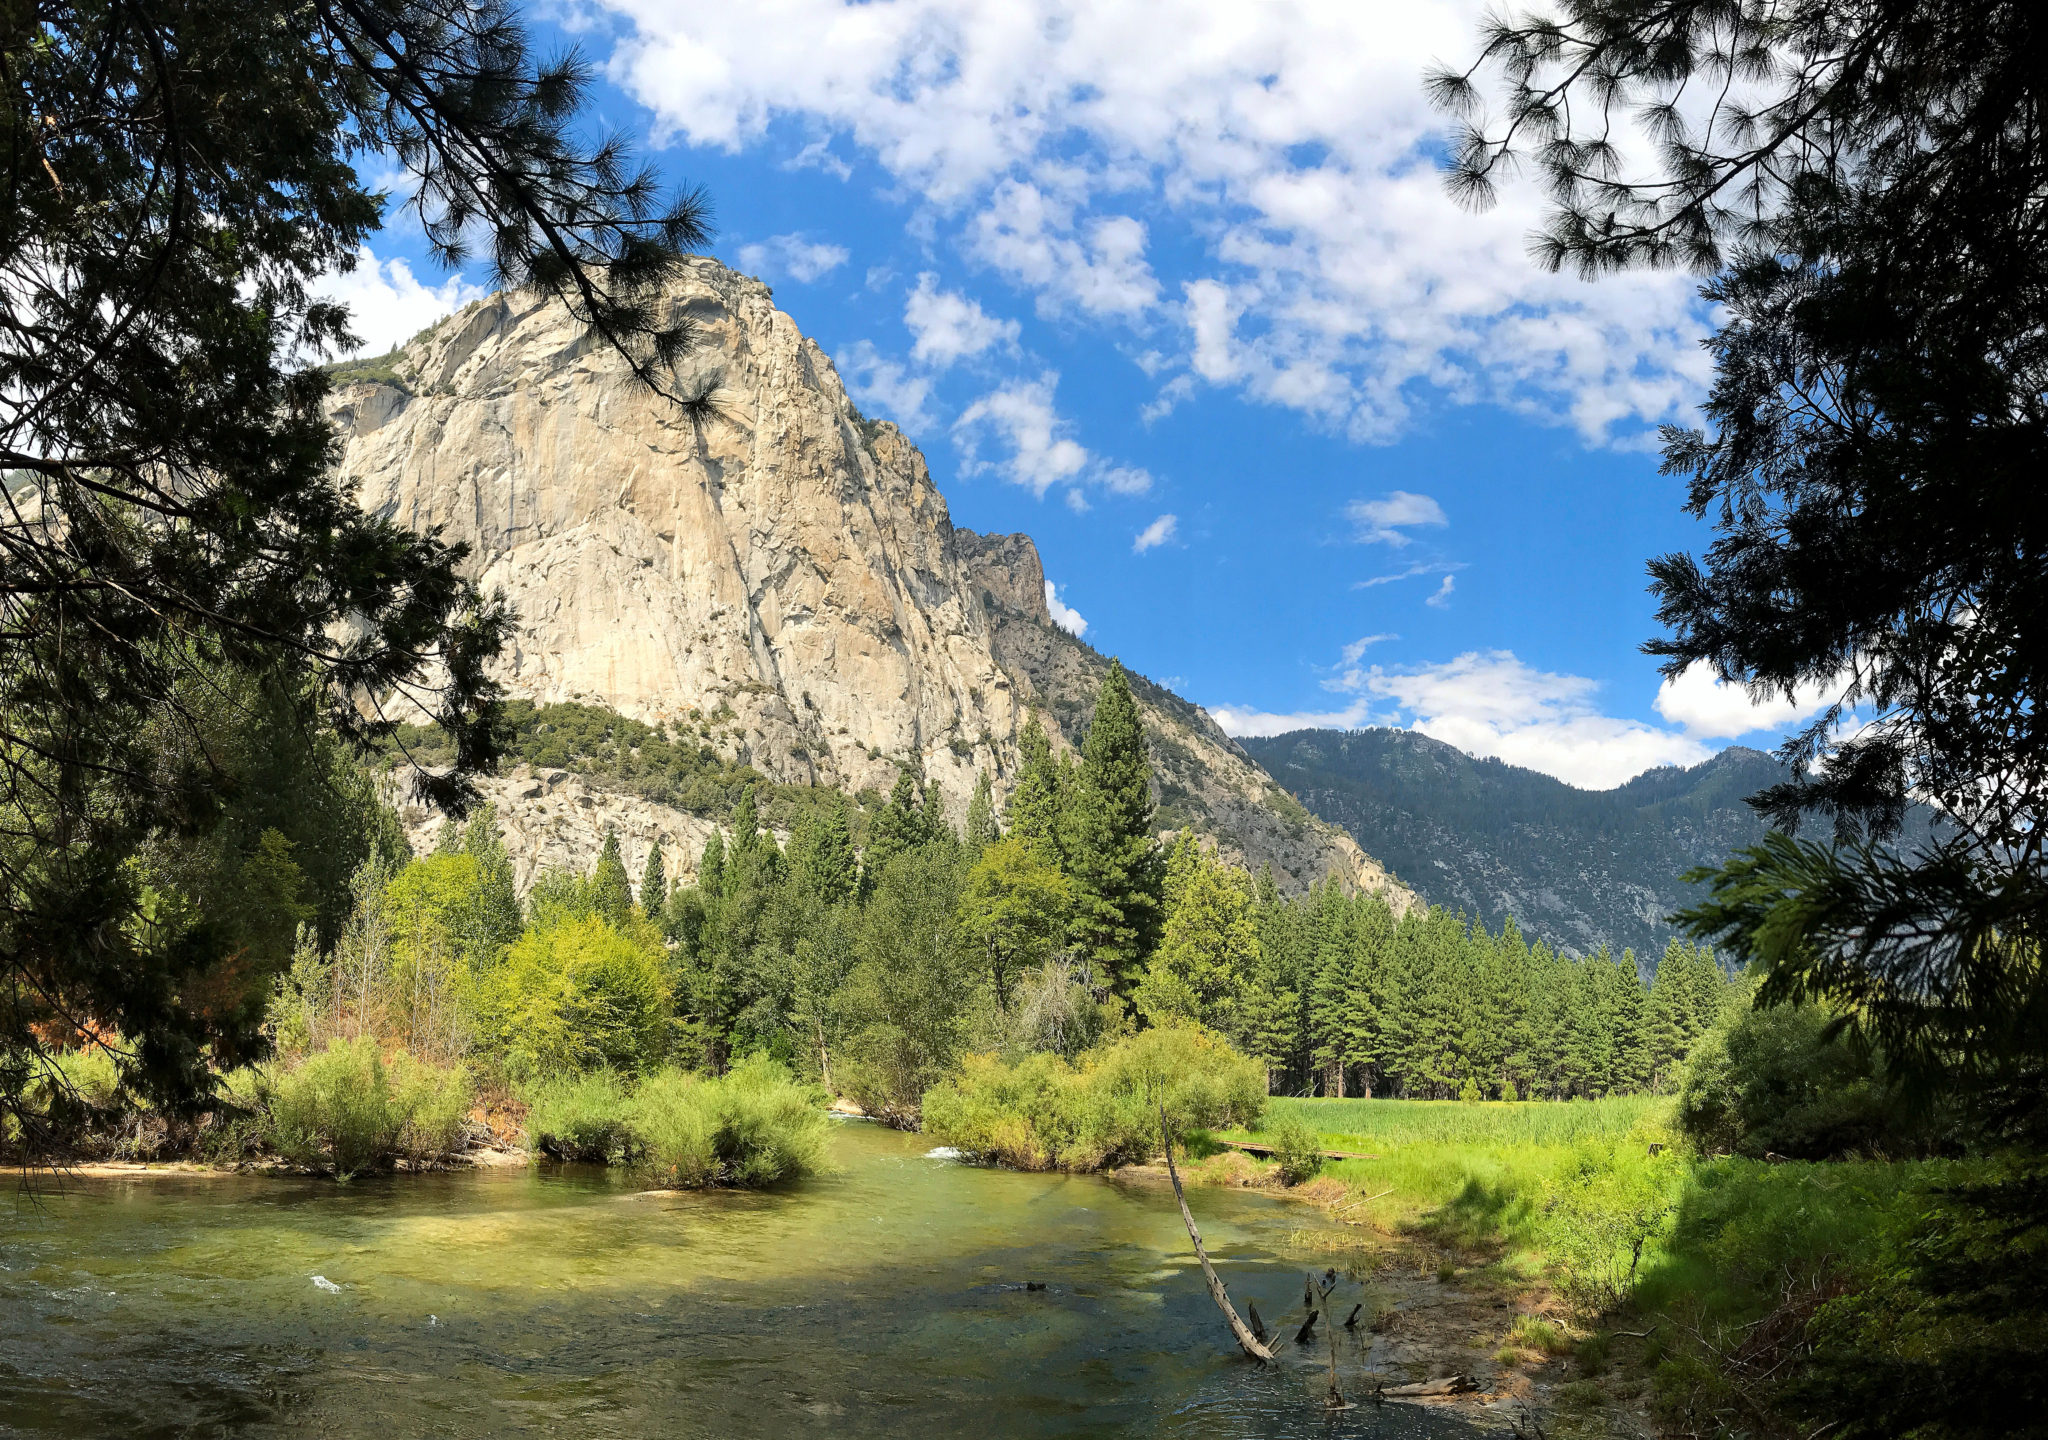 The Kings River and Zumwalt Meadow